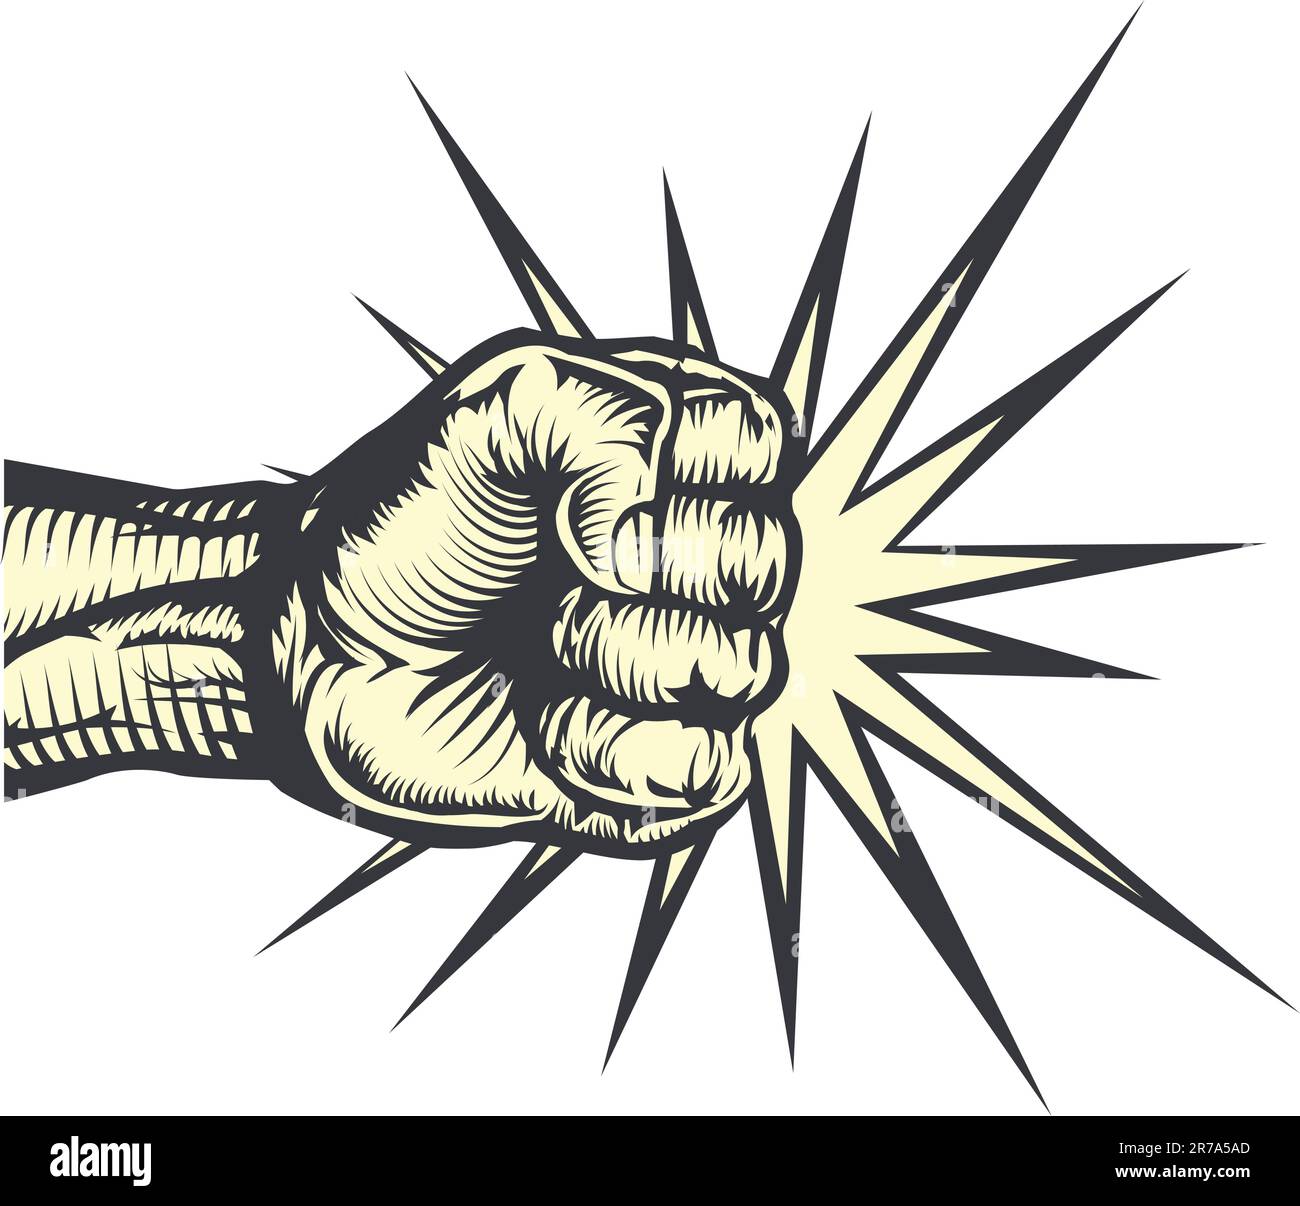 A fist punching out striking or hitting with impact lines Stock Vector